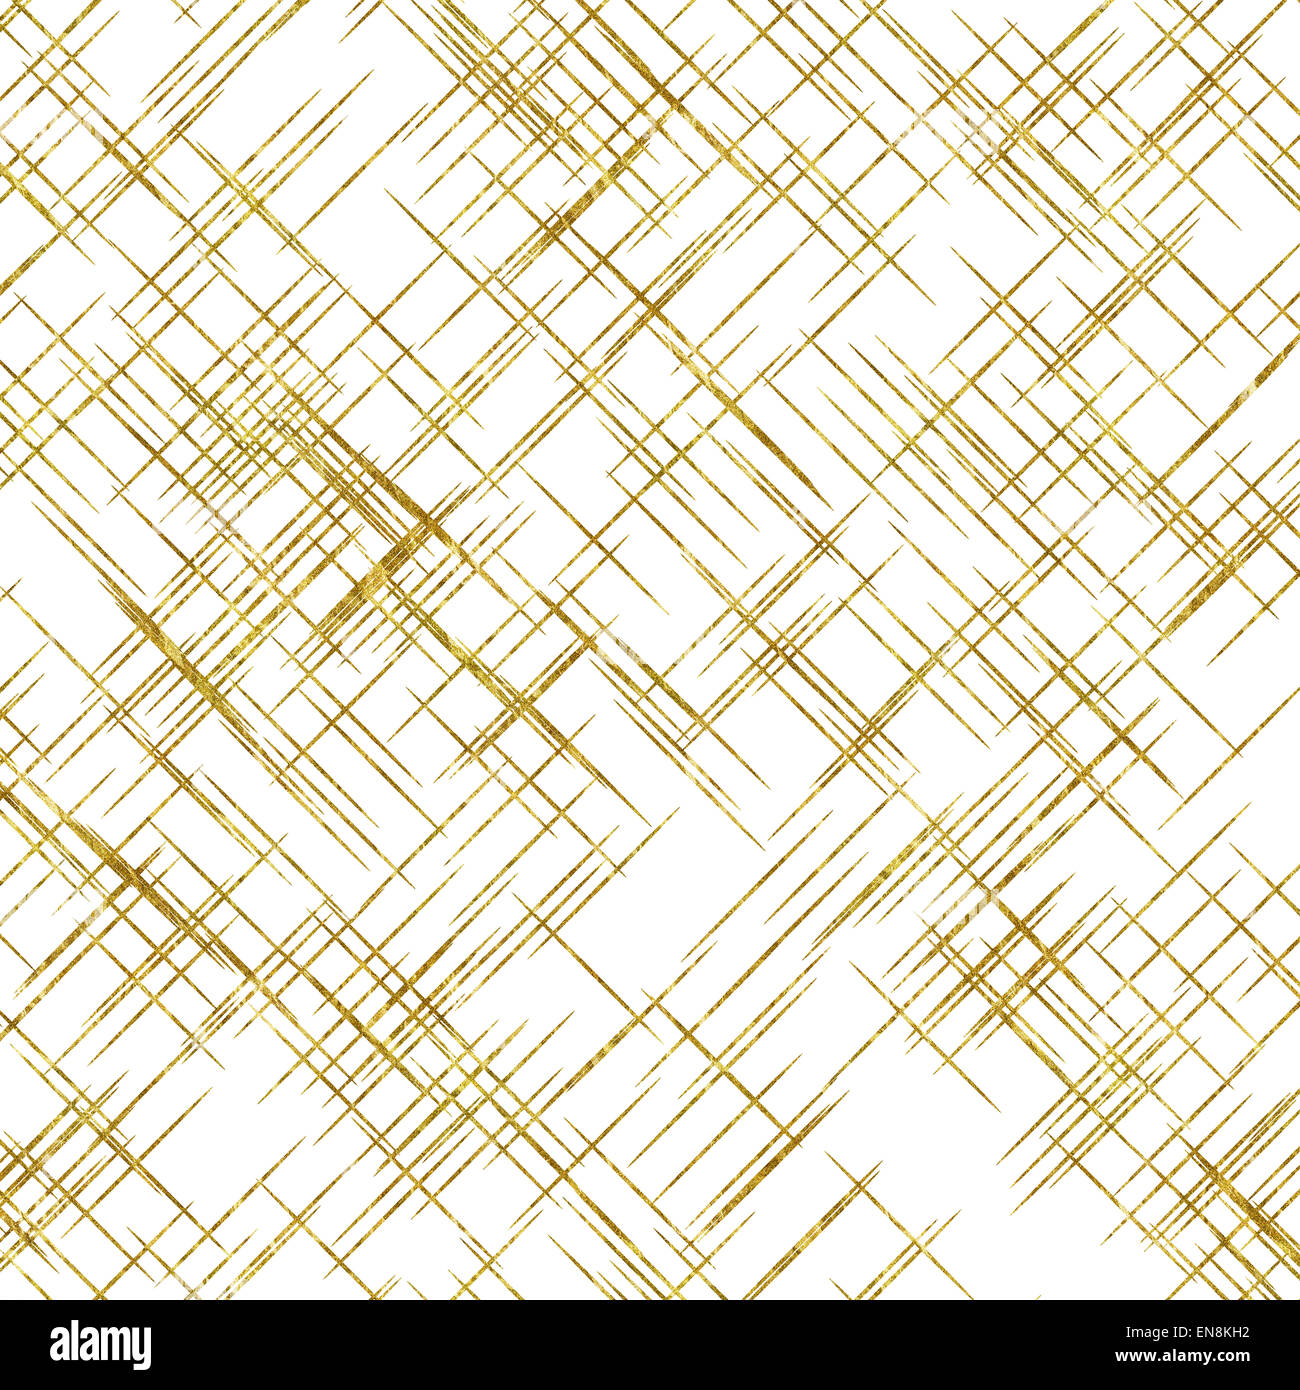 Gold Hatch Mark Lines Faux Foil Metallic Background Pattern Stock Photo